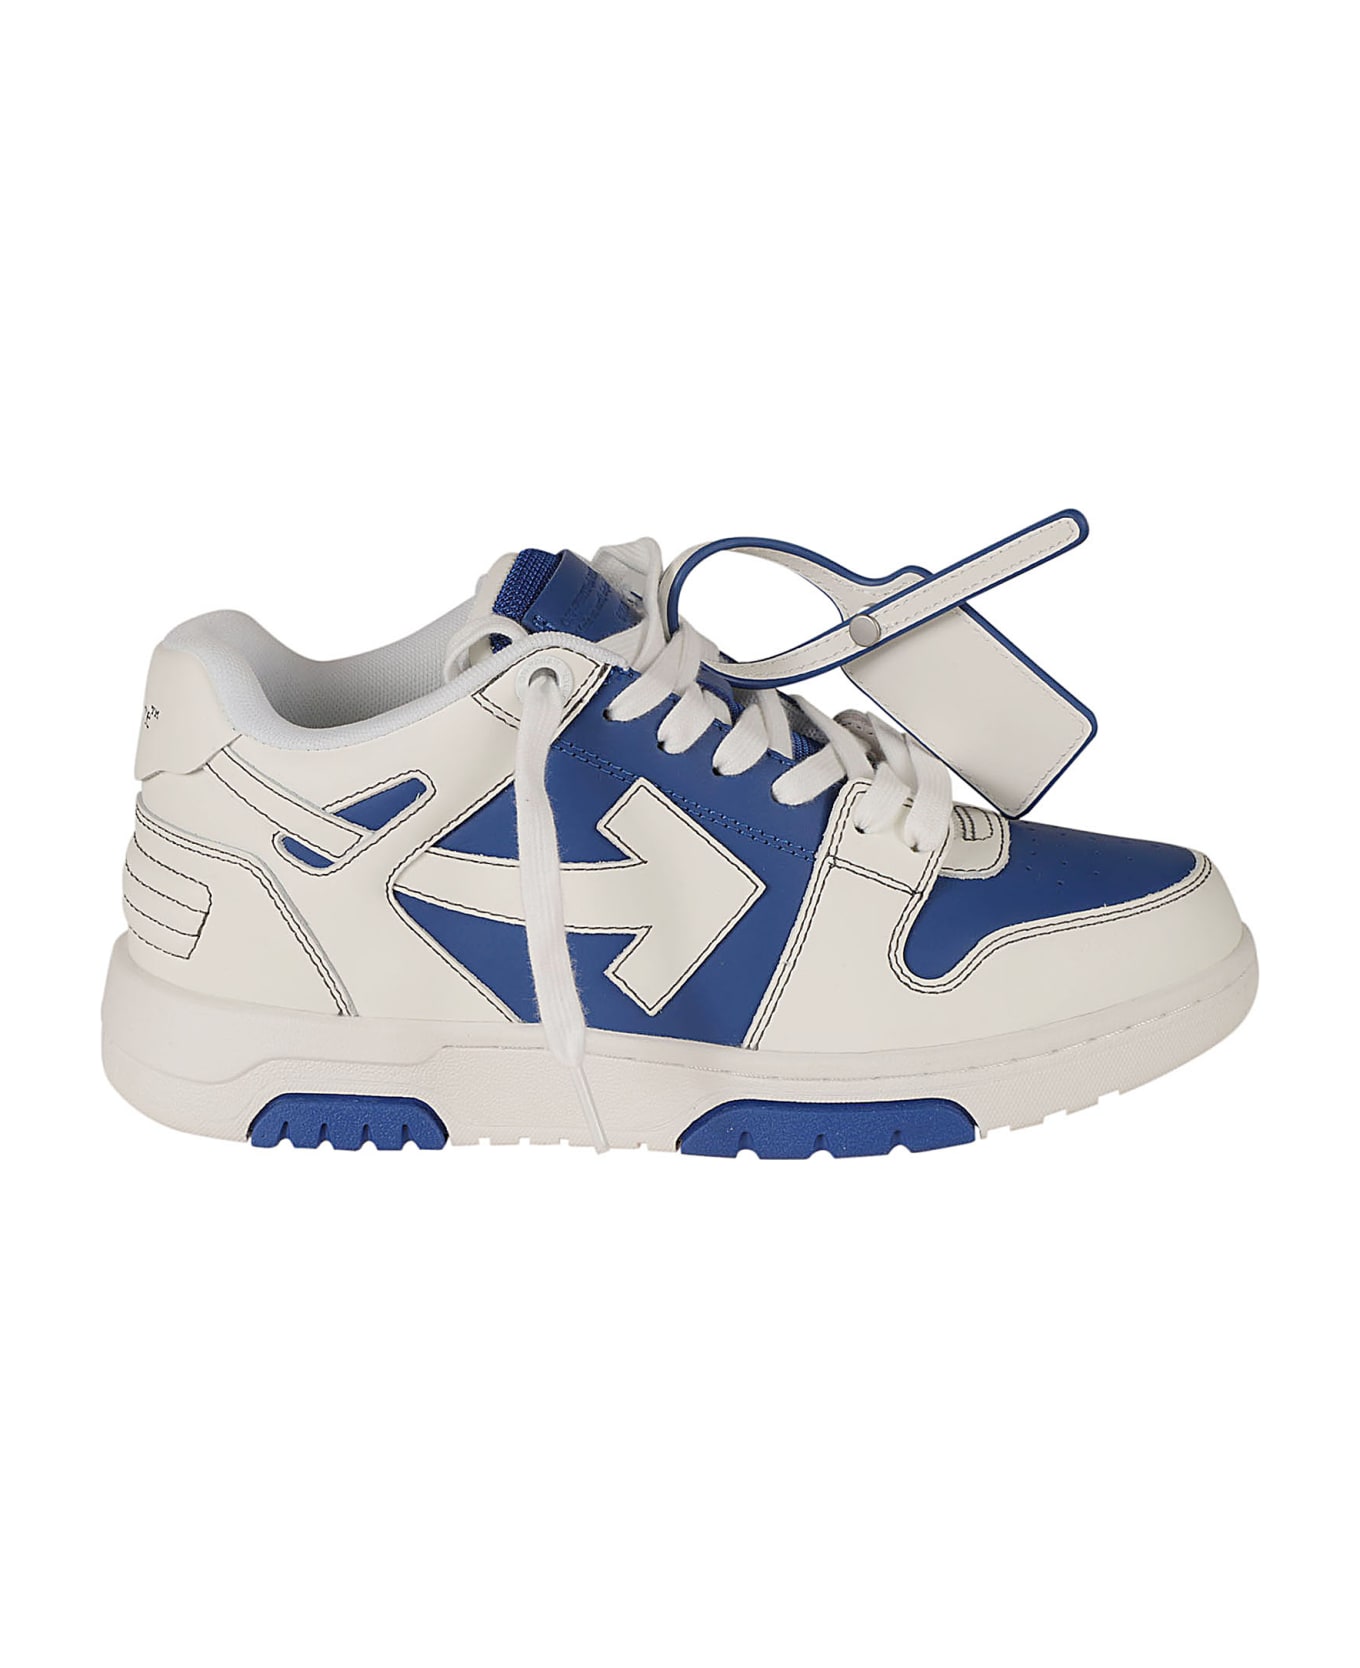 Off-White Out Of Office Sneakers - Navy Blue/Off White